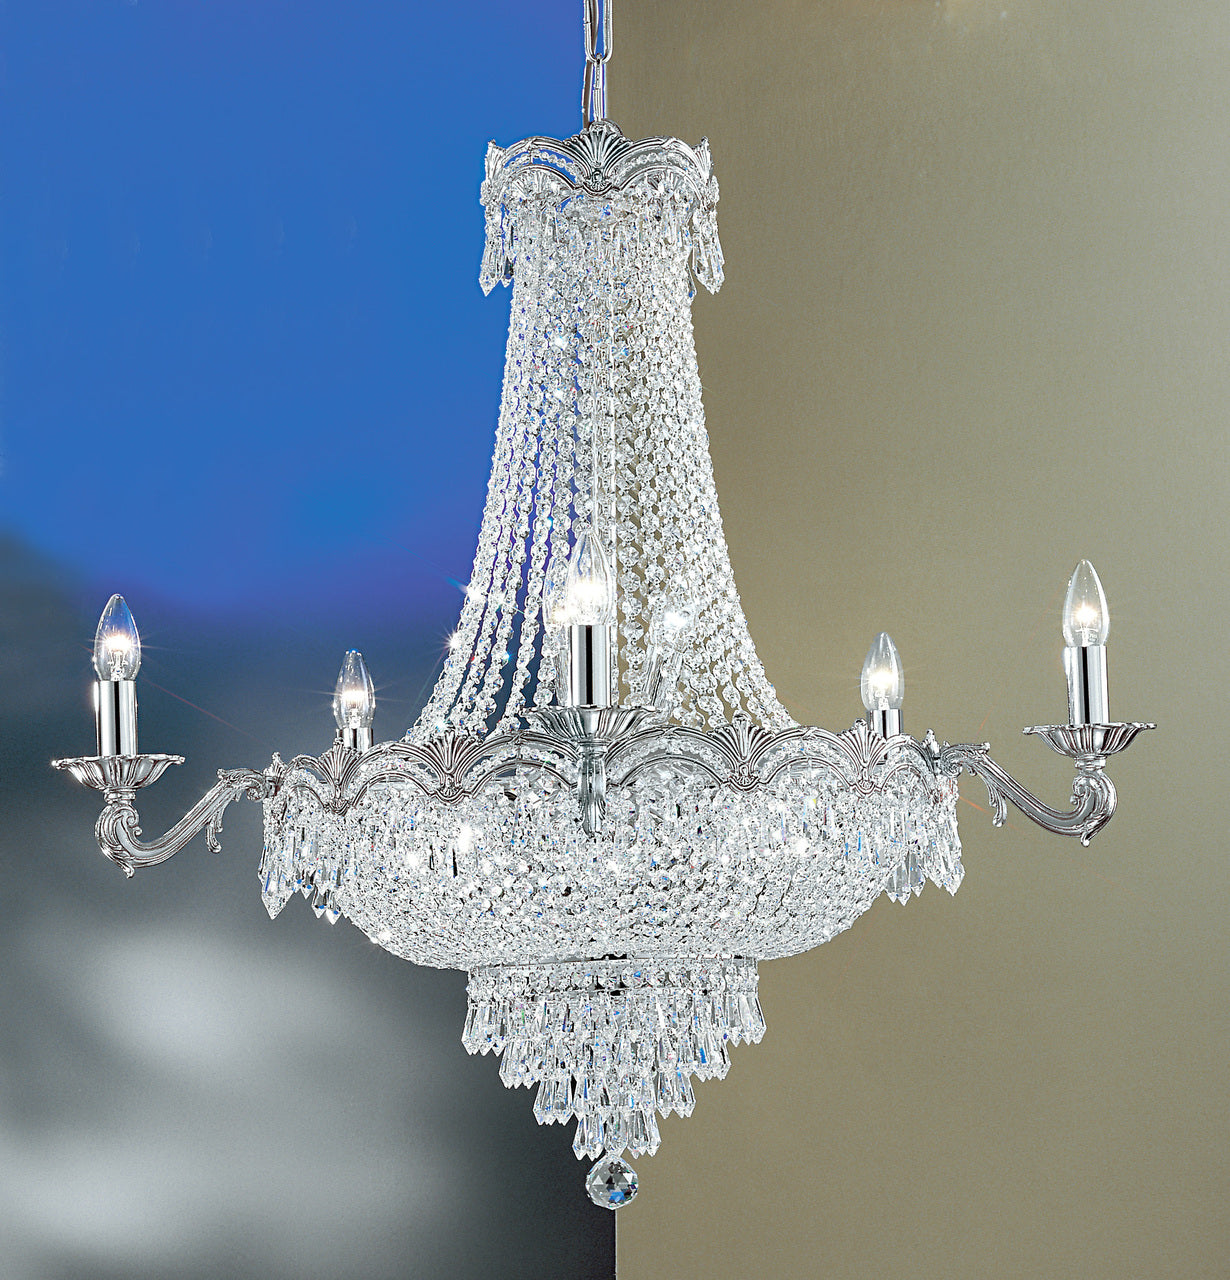 Classic Lighting 1859 CHB S Regency II Crystal Chandelier in Chrome/Black Patina (Imported from Spain)